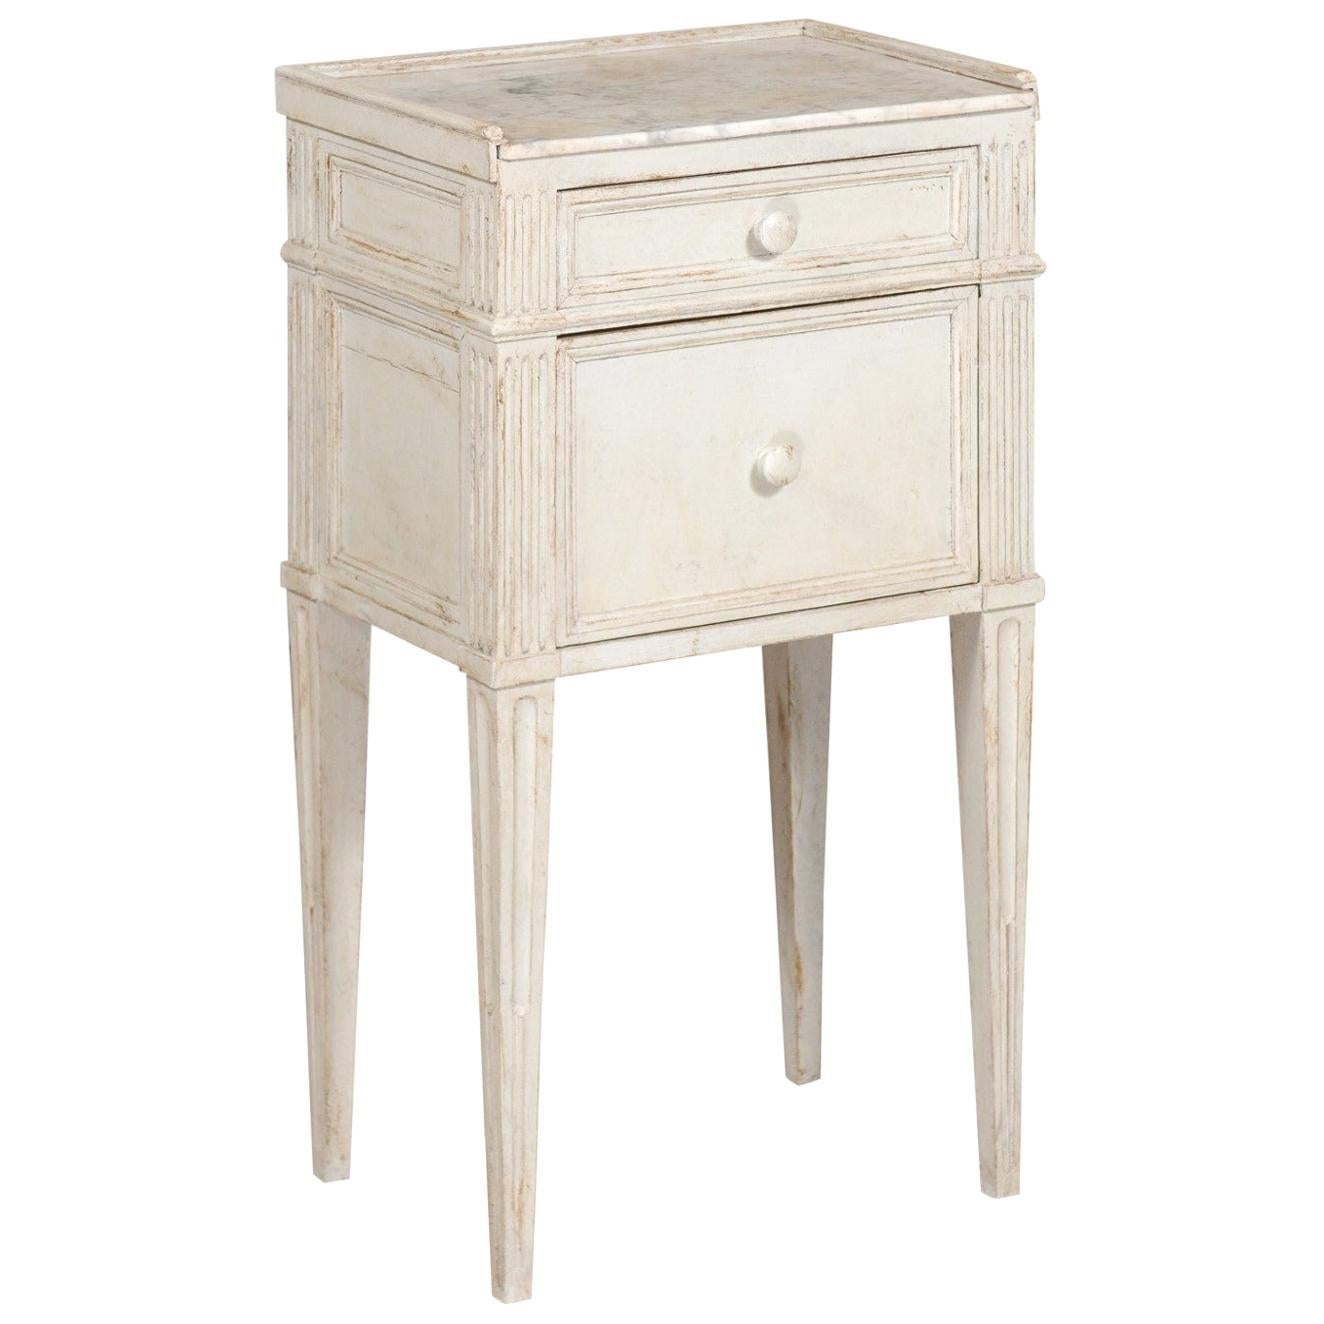 Swedish 19th Century Neoclassical Style Painted Nightstand Table with Marble Top